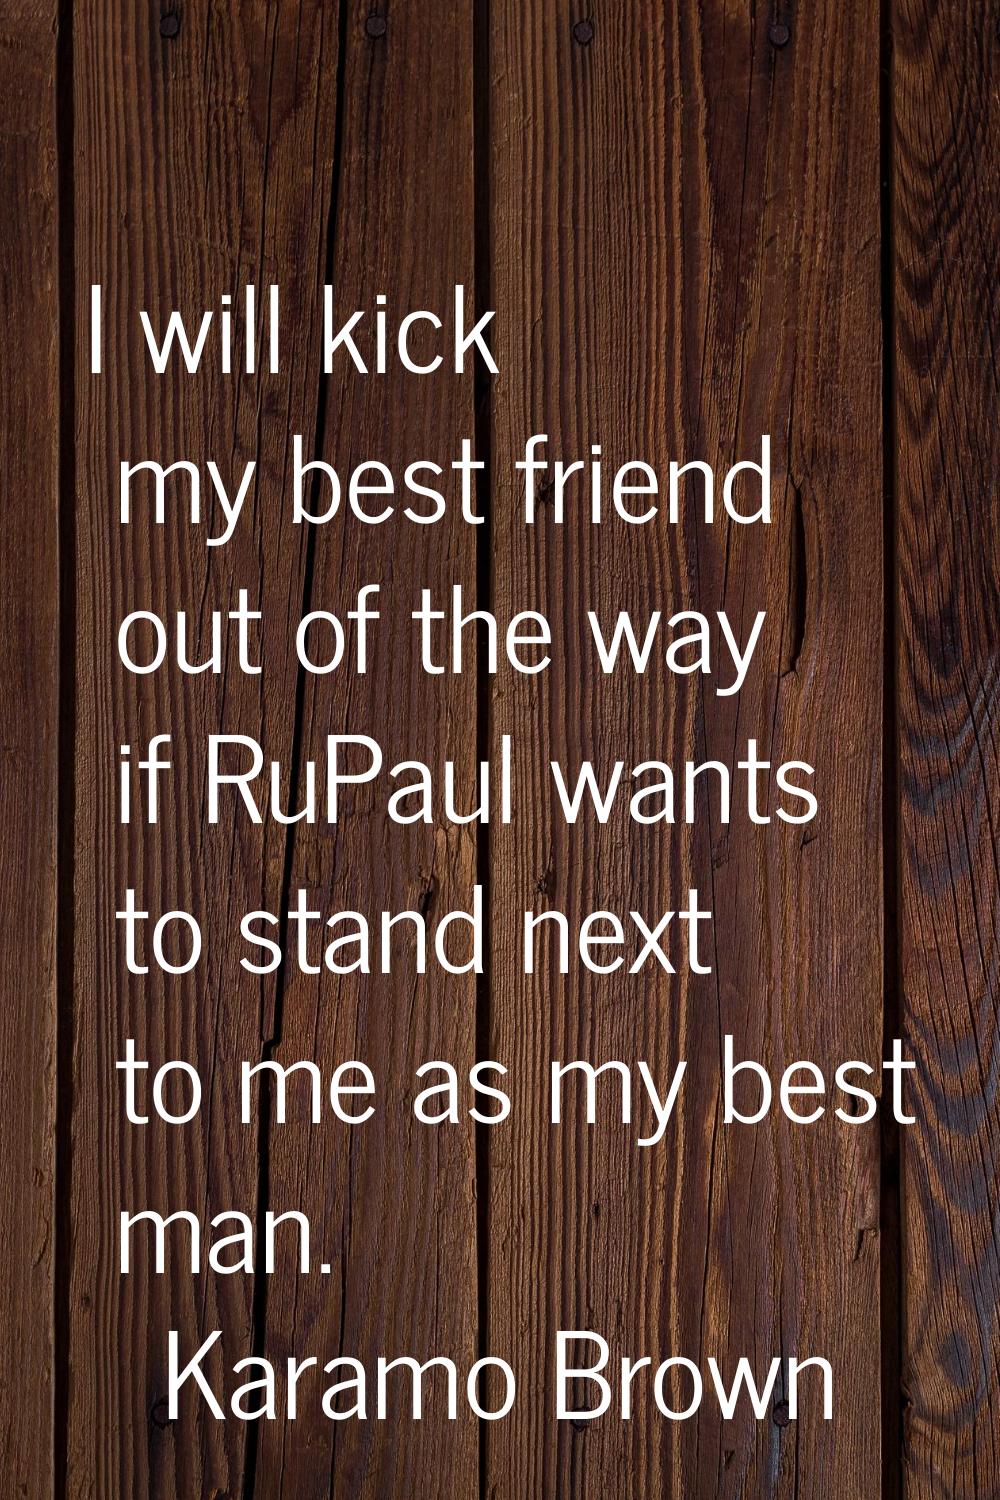 I will kick my best friend out of the way if RuPaul wants to stand next to me as my best man.